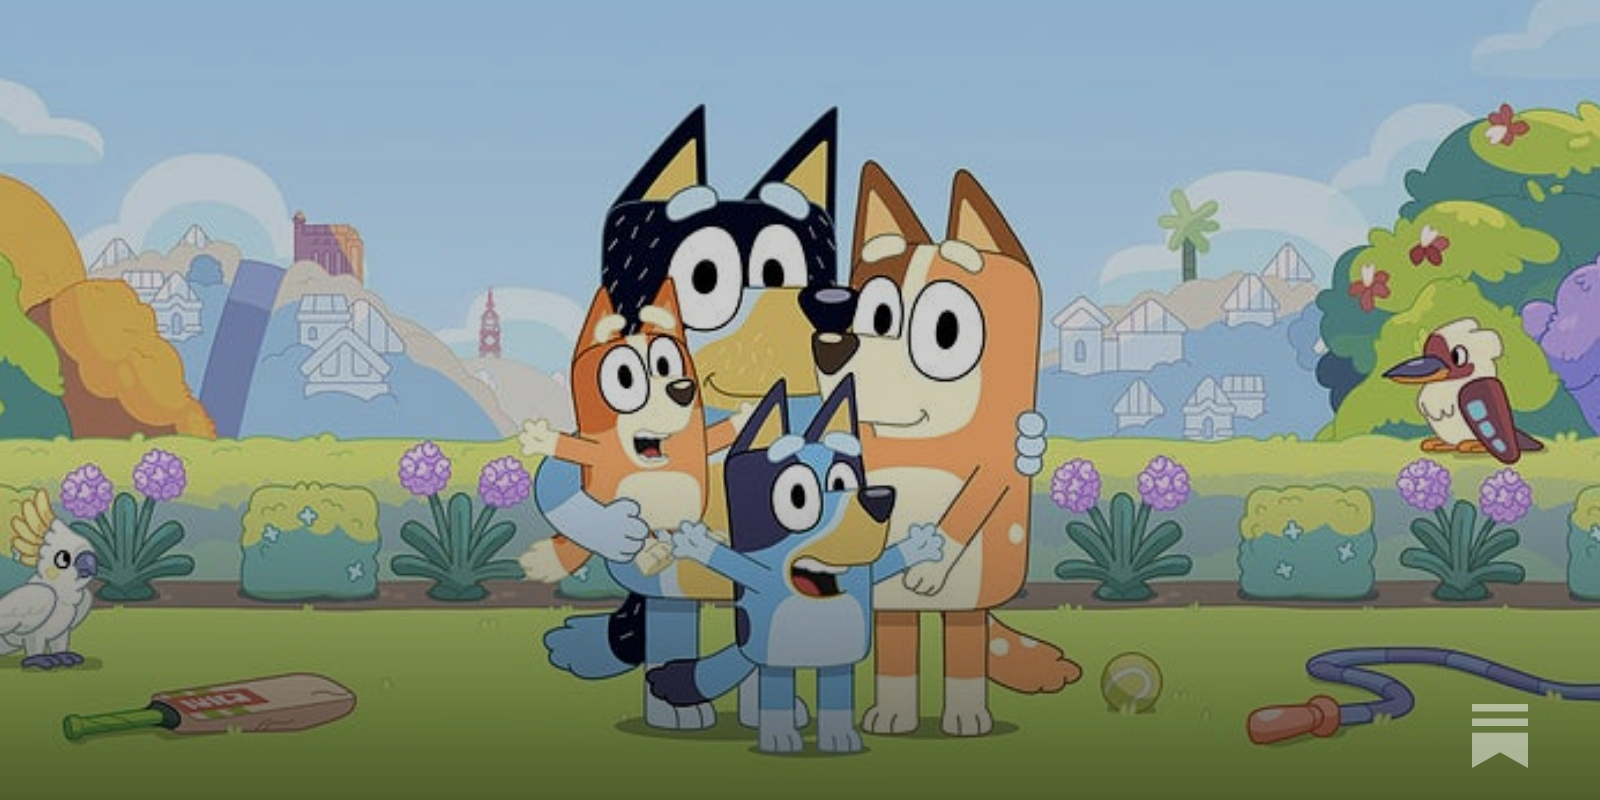 What makes 'Bluey' a perfect show for the whole family - Upworthy